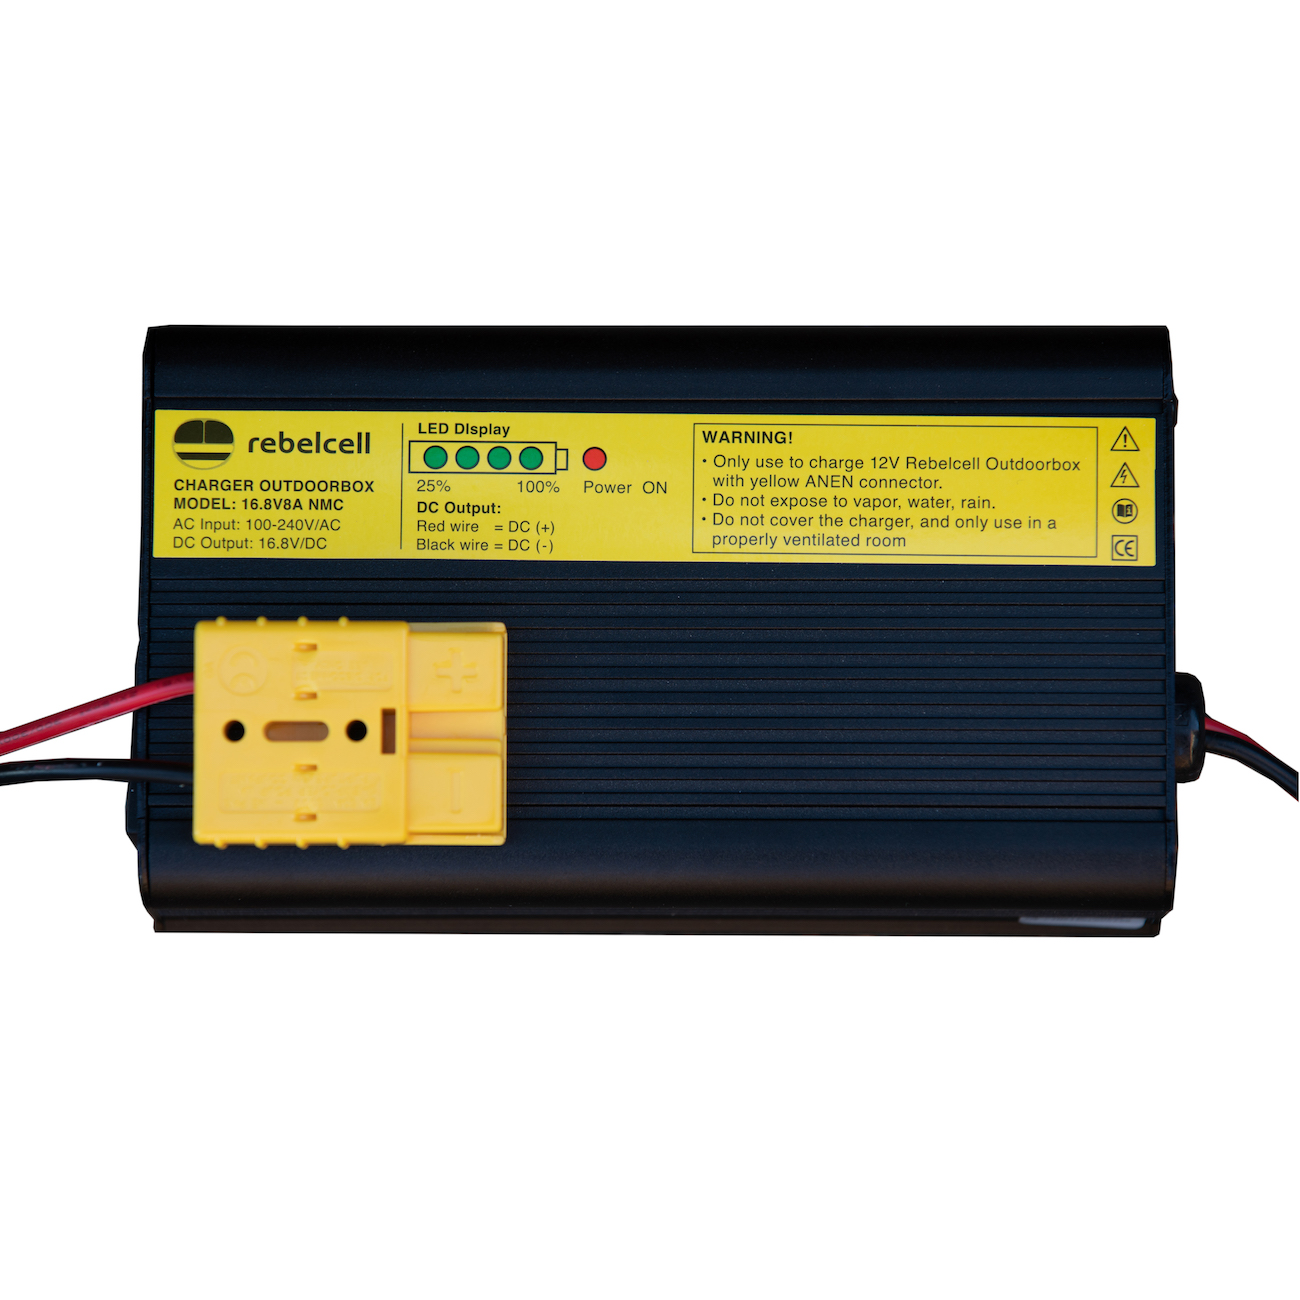 Rebelcell charger 16.8V8A product image